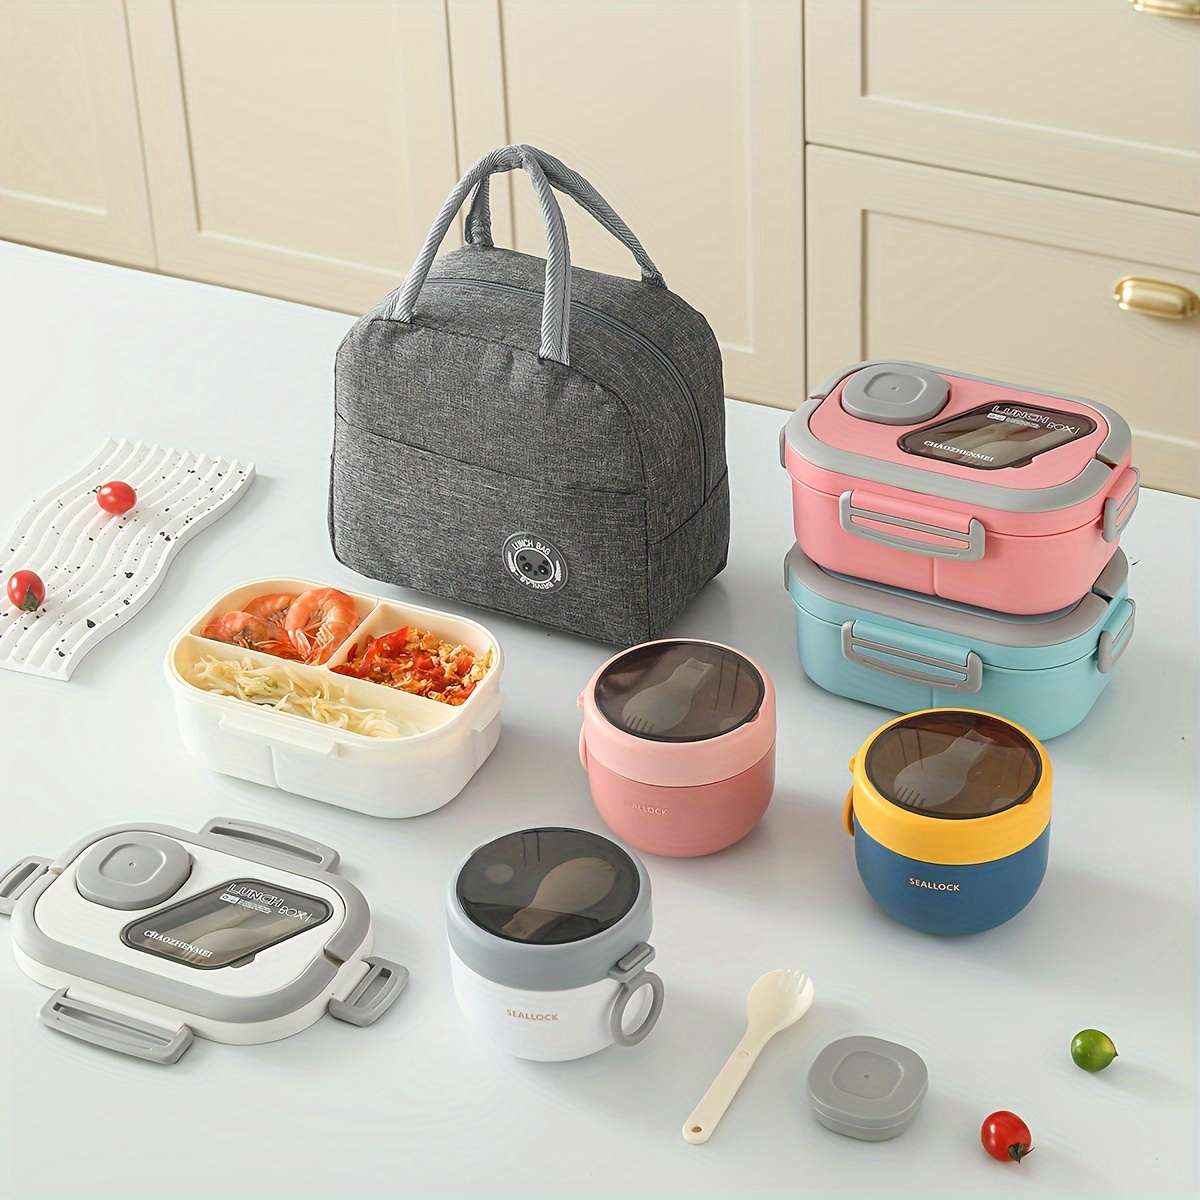 

European Style 3-piece Portable Lunch Box Set With Insulated Lunch Bag And Oatmeal Cup - Durable Plastic Bento Boxes, Microwavable, Ideal For Storage And On-the-go Meals